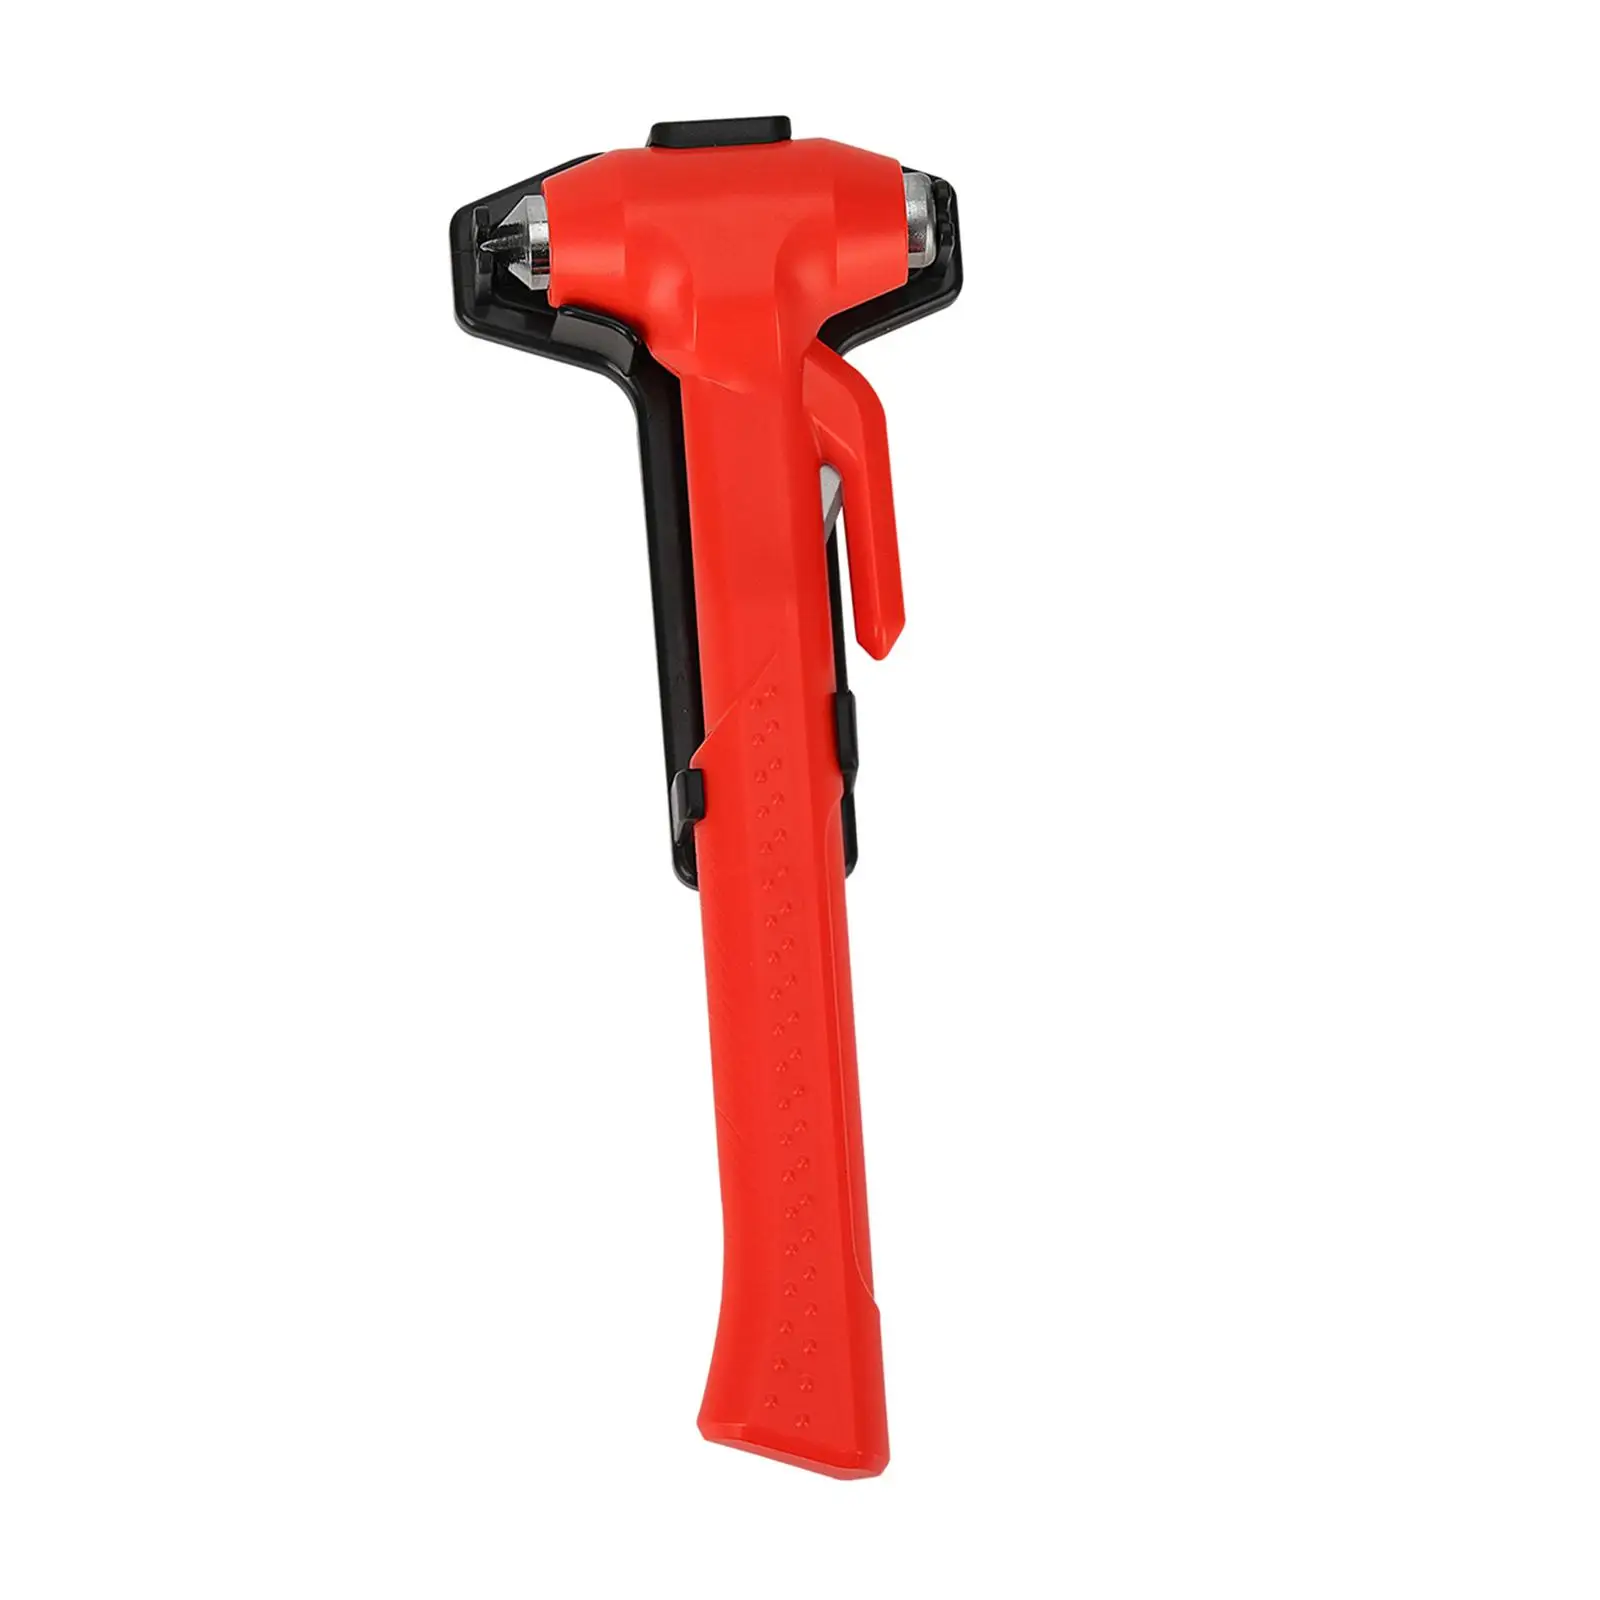 Automotive Safety Hammer Tool Compact Glass Breaker Survival Tool Vehicles Glass Breaker for Card Vehicles Suvs Automotive Red